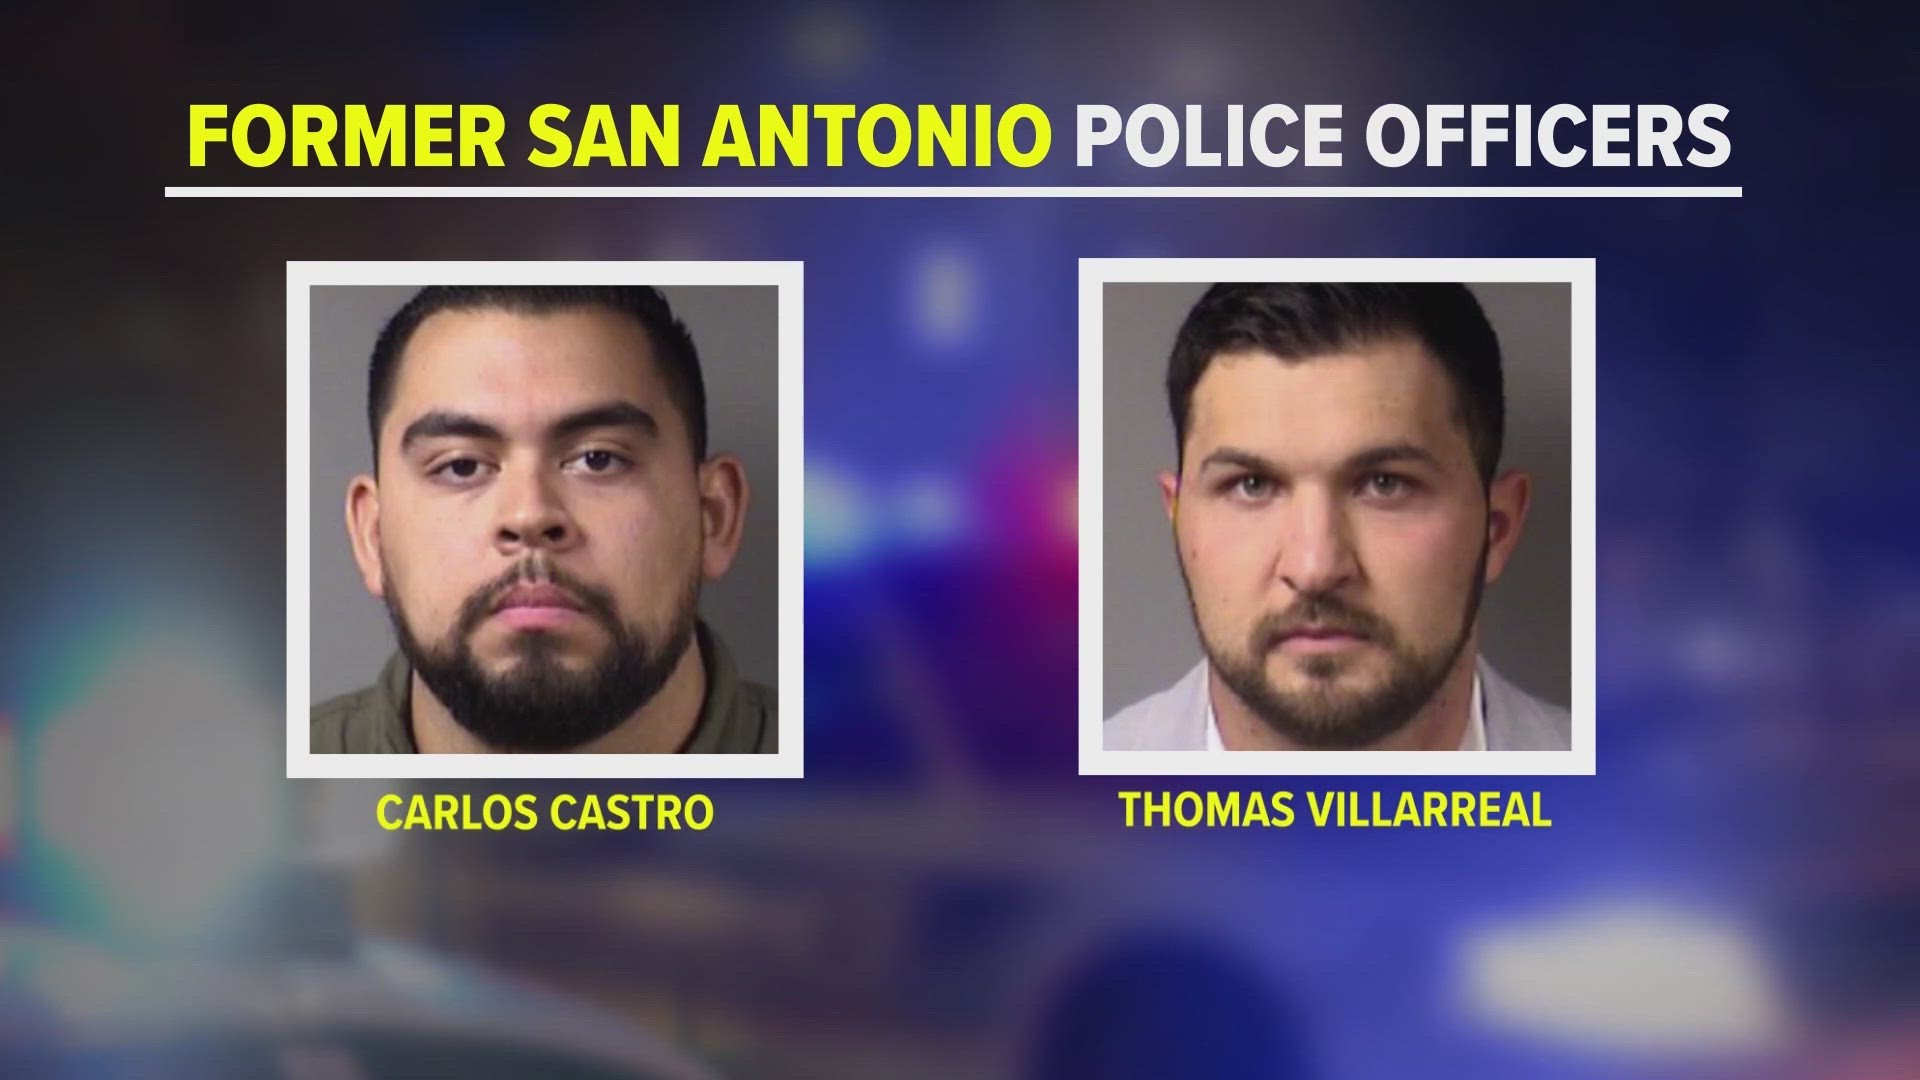 Two former San Antonio Police officers lost their jobs connected to a traffic stop. They are fighting to stay out of prison for the same incident.